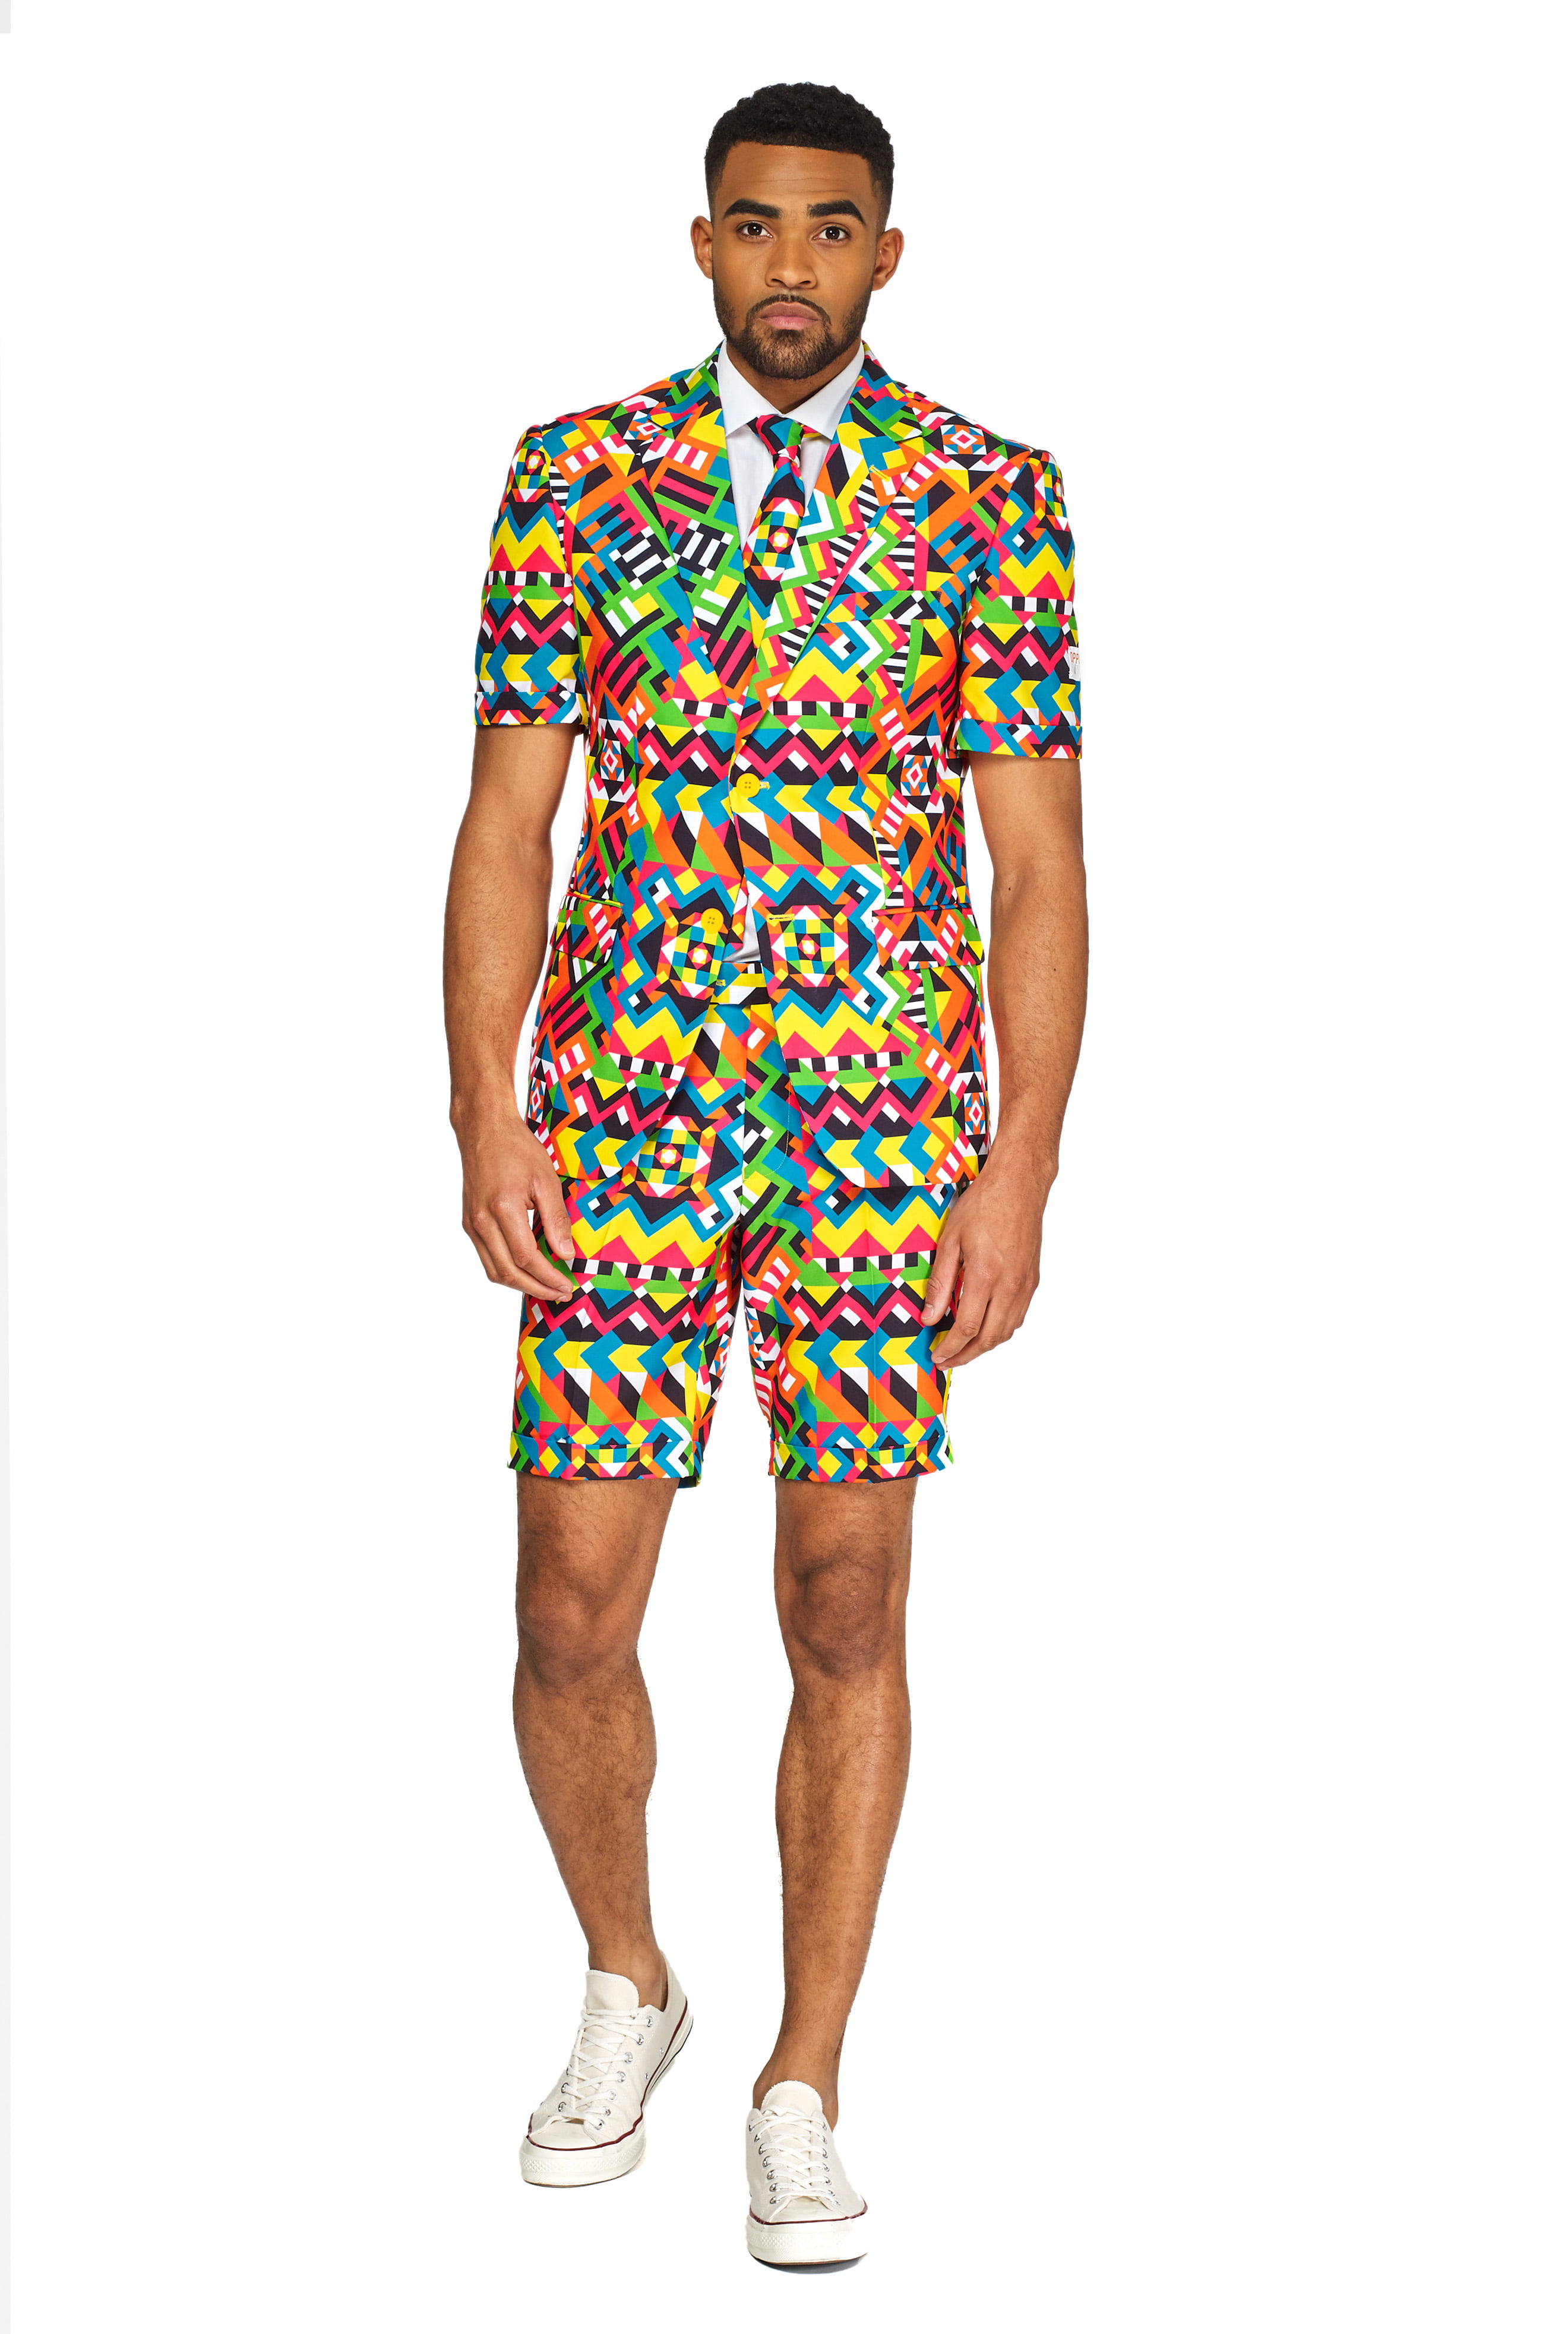 OppoSuits - OppoSuits Men's Summer Abstractive Colorful Suit - Walmart ...